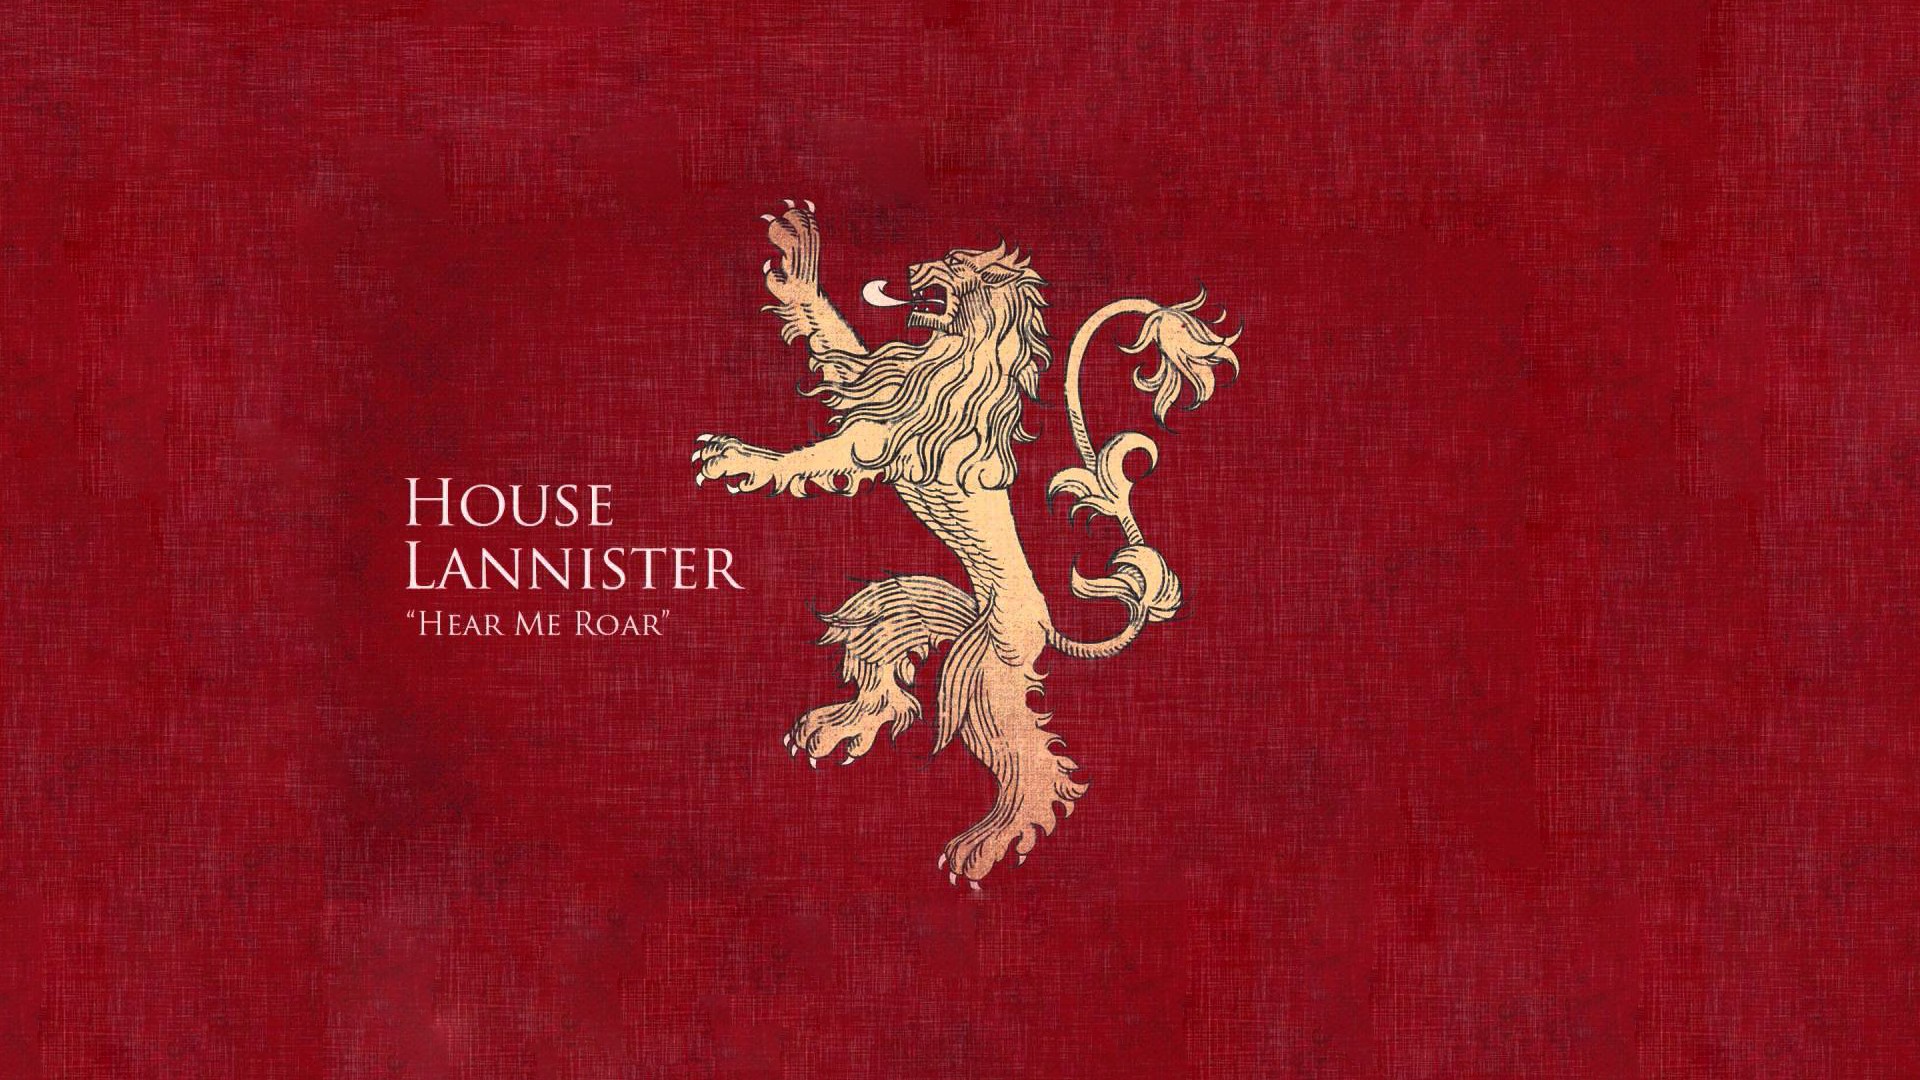 General 1920x1080 House Lannister Game of Thrones red background TV series sigils